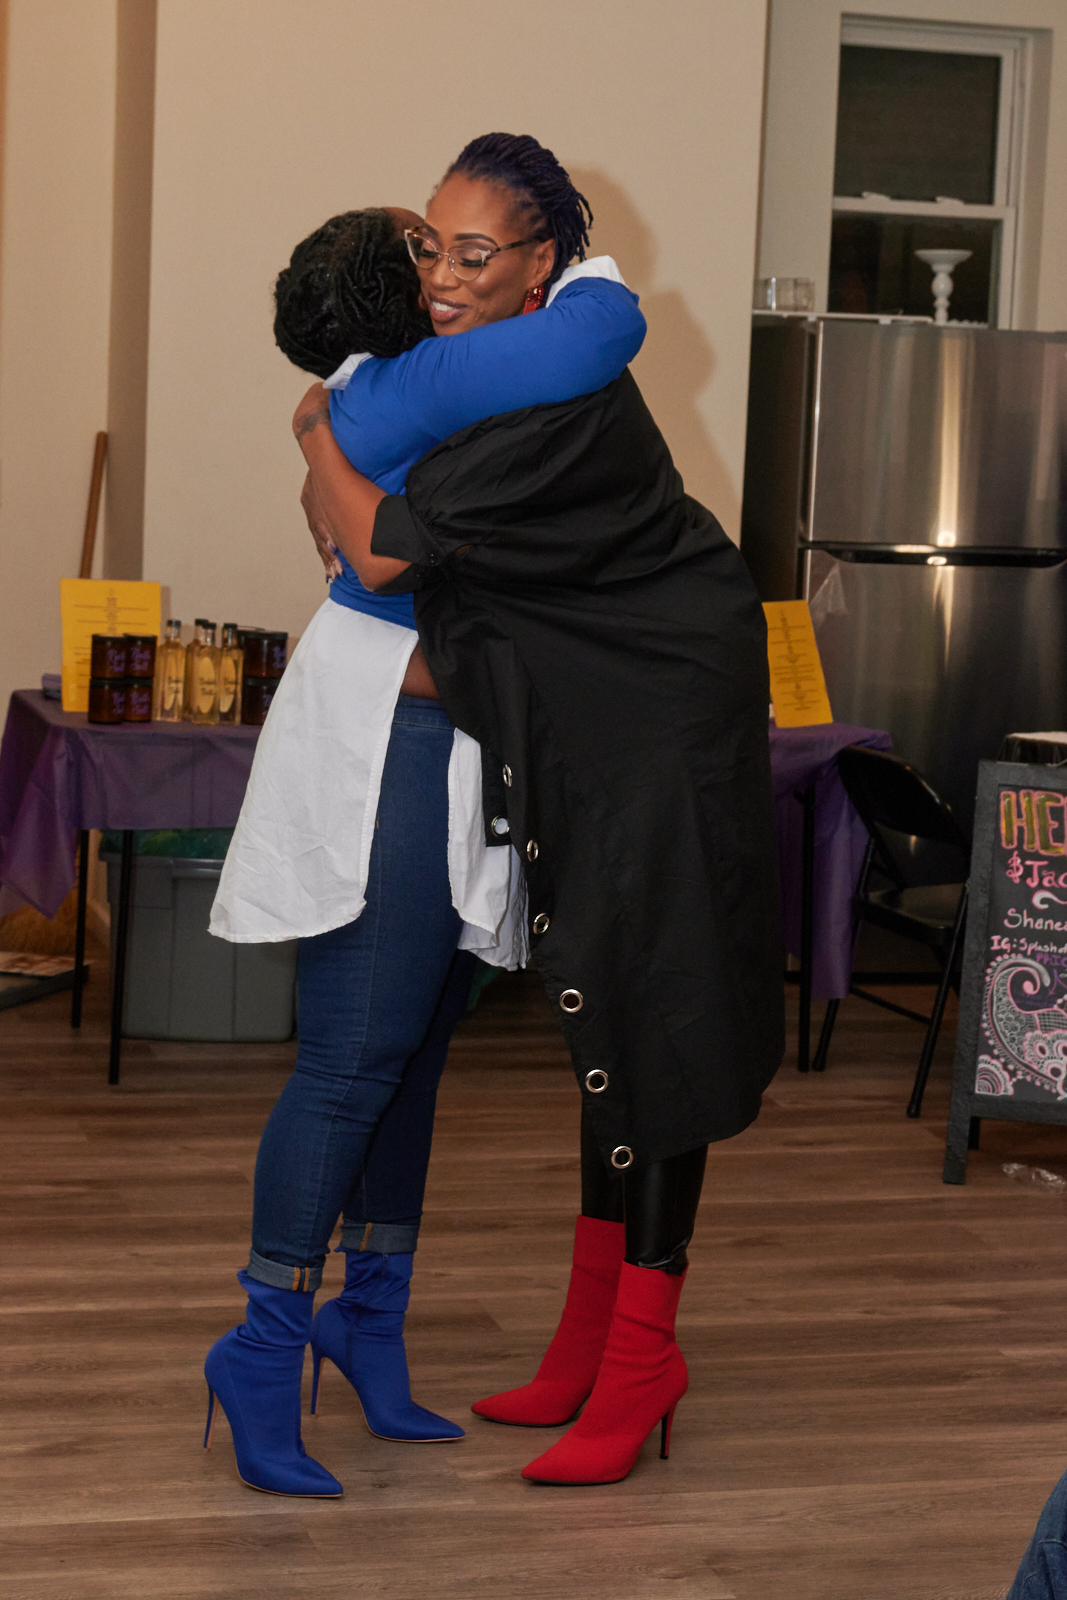 Lynette Trawick and another woman hugging each other.